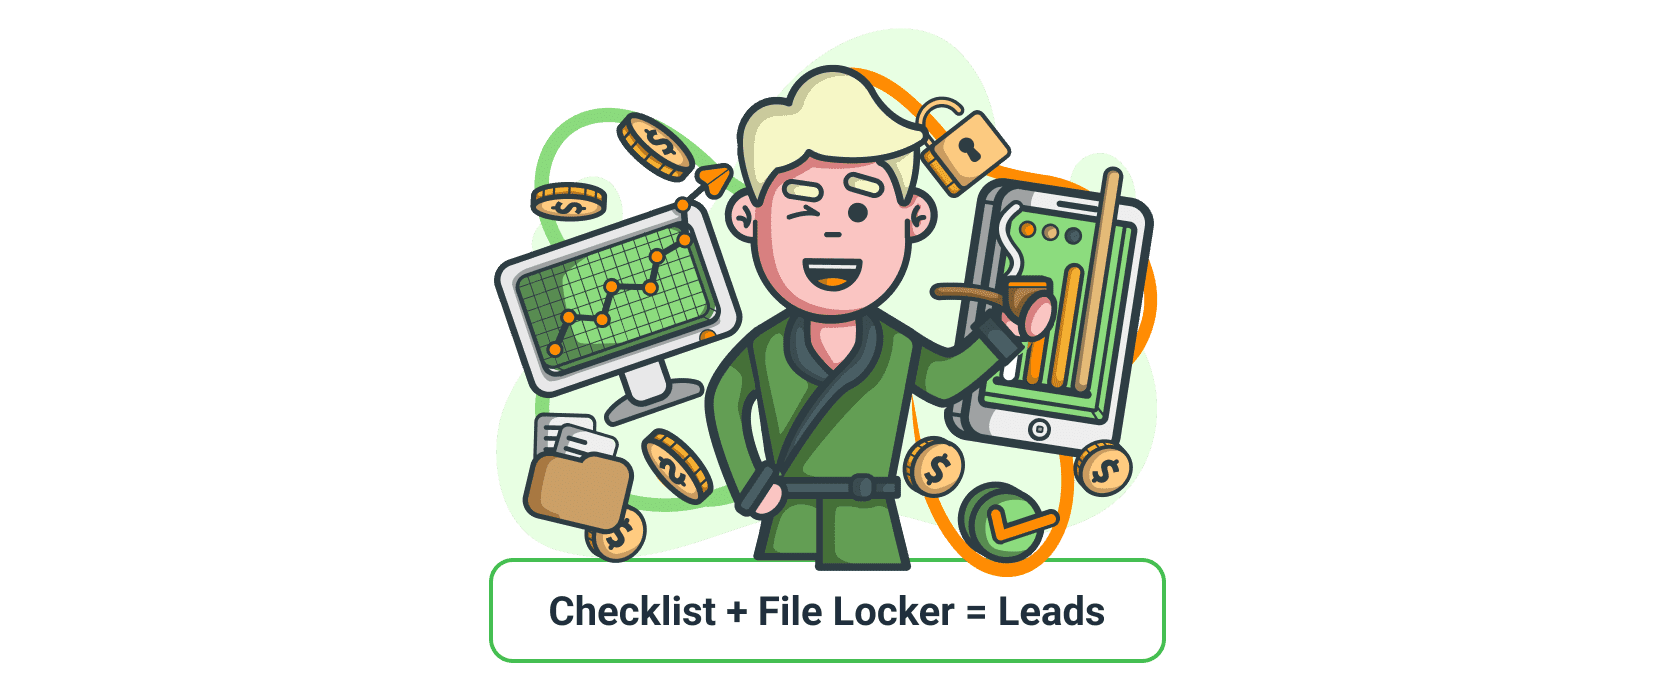 Checklist and File Locker are the key to getting leads